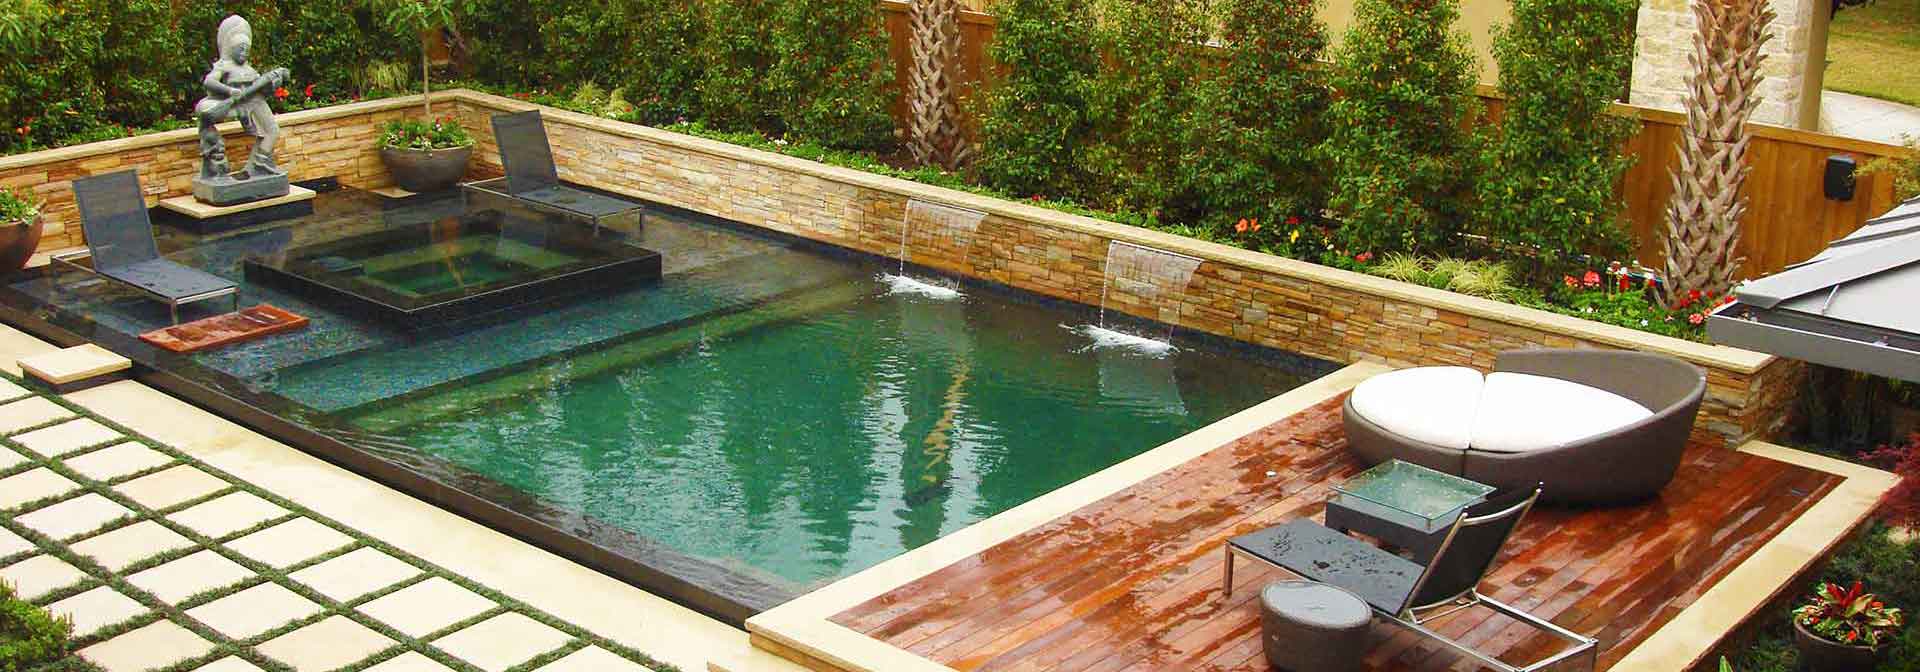 Pool Spa and Deck by Southern Land Design of Dallas - Fort Worth